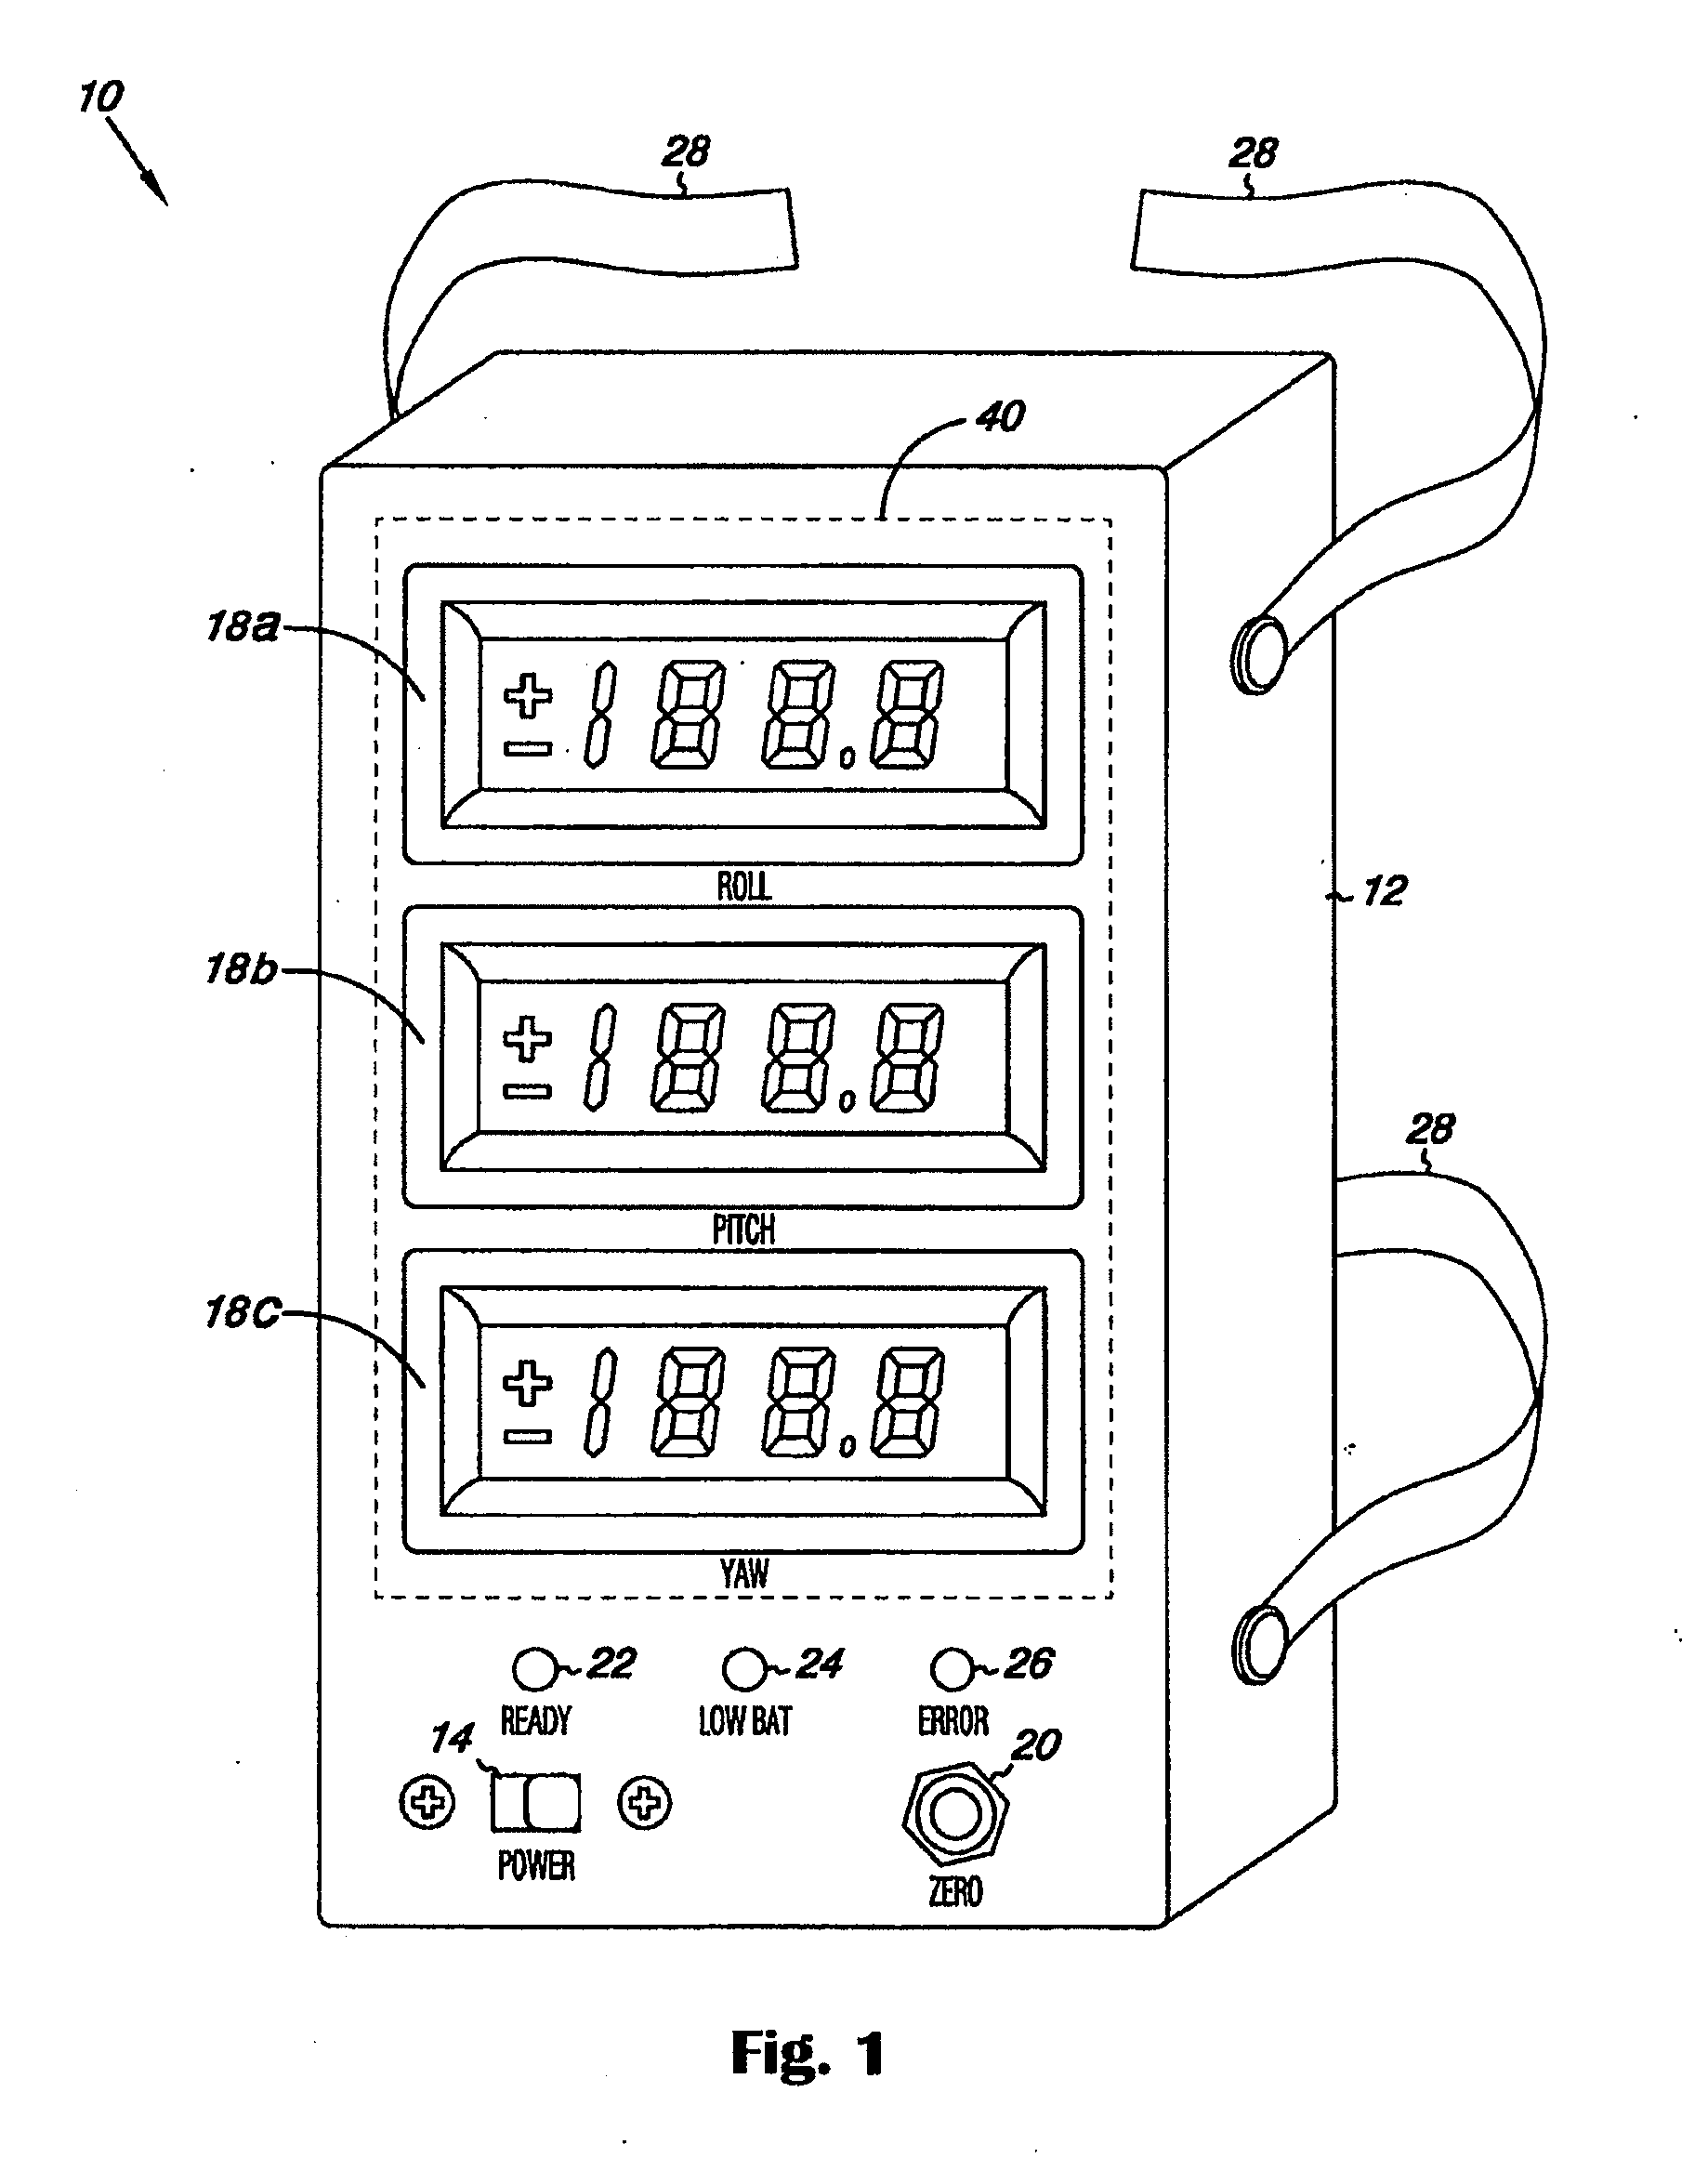 Surgical orientation device and method